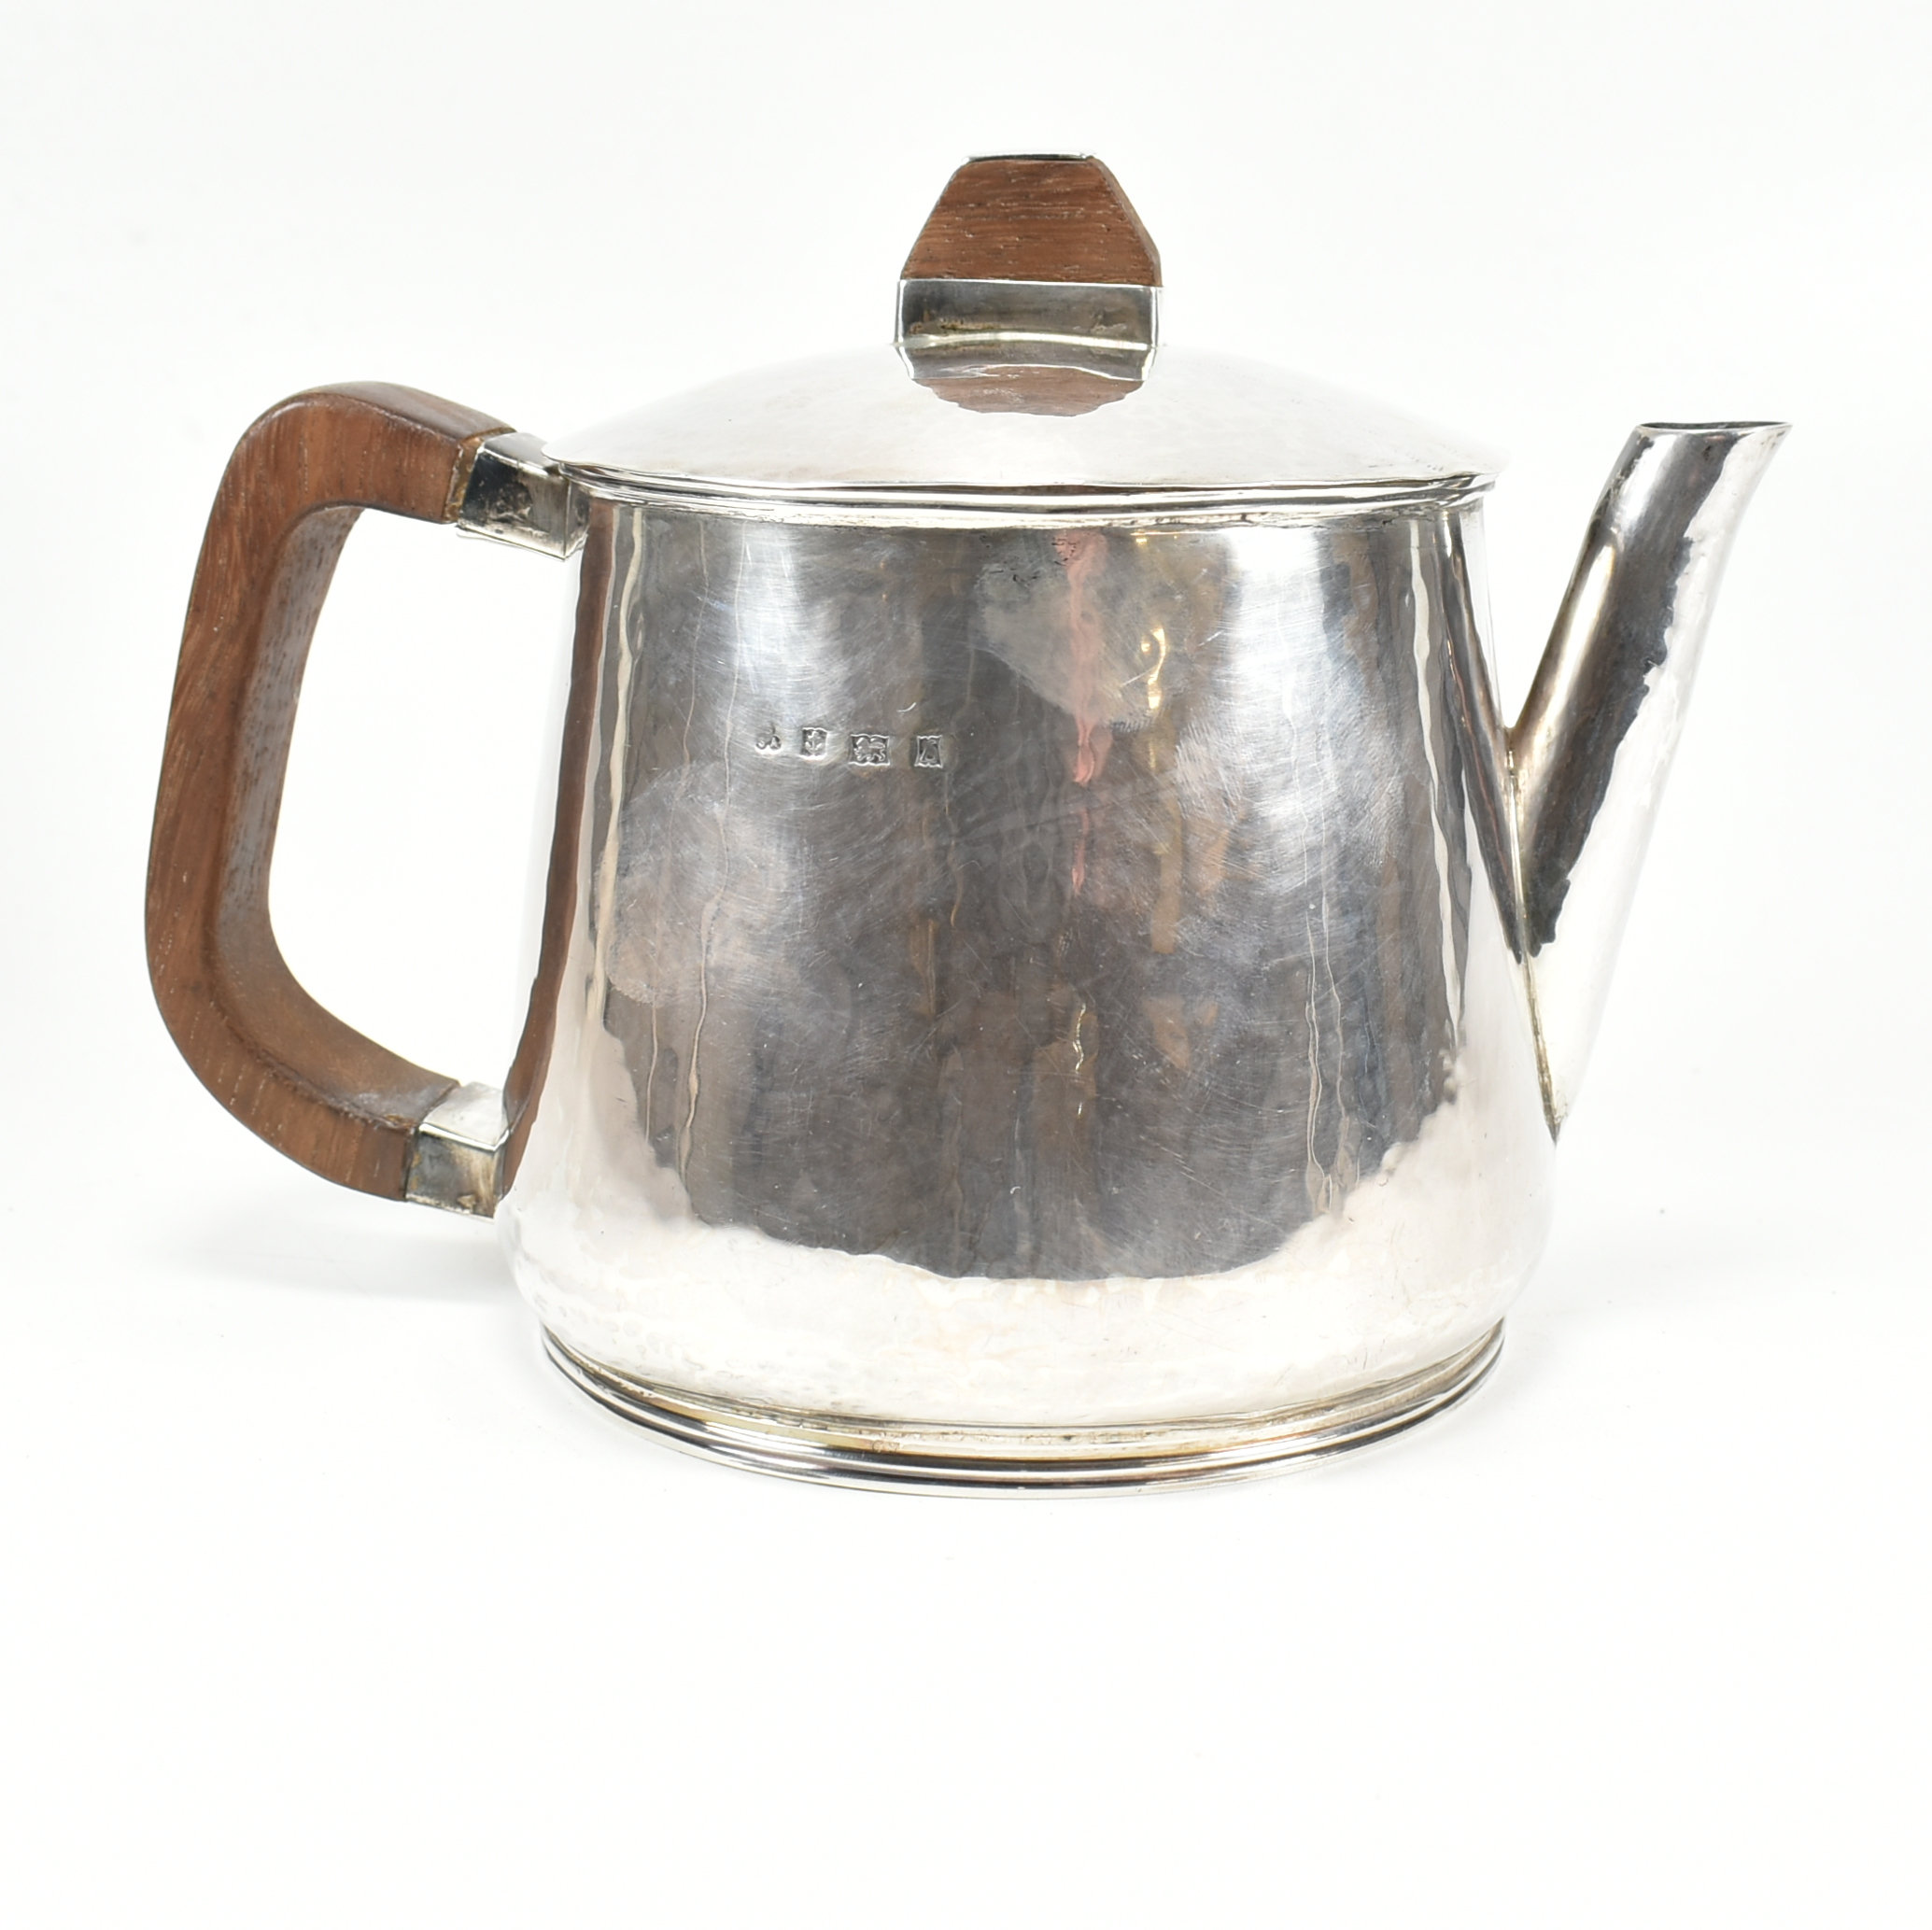 1960S ARTS & CRAFTS STYLE HALLMARKED SILVER TEAPOT - Image 3 of 7